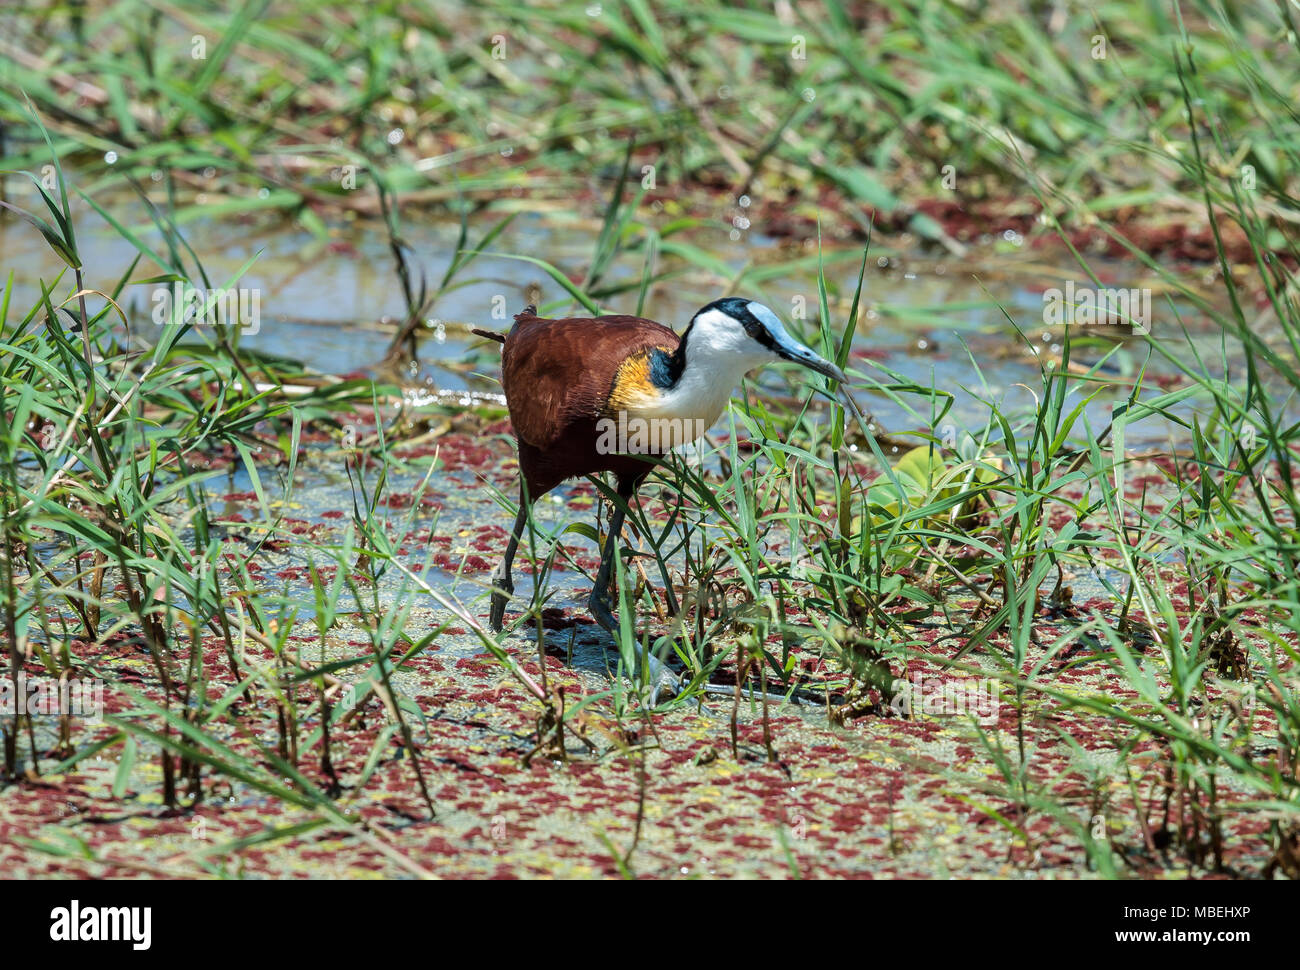 The African jacana is a wader in the family Jacanidae, identifiable by long toes and long claws that enable them to walk on floating vegetation. Stock Photo